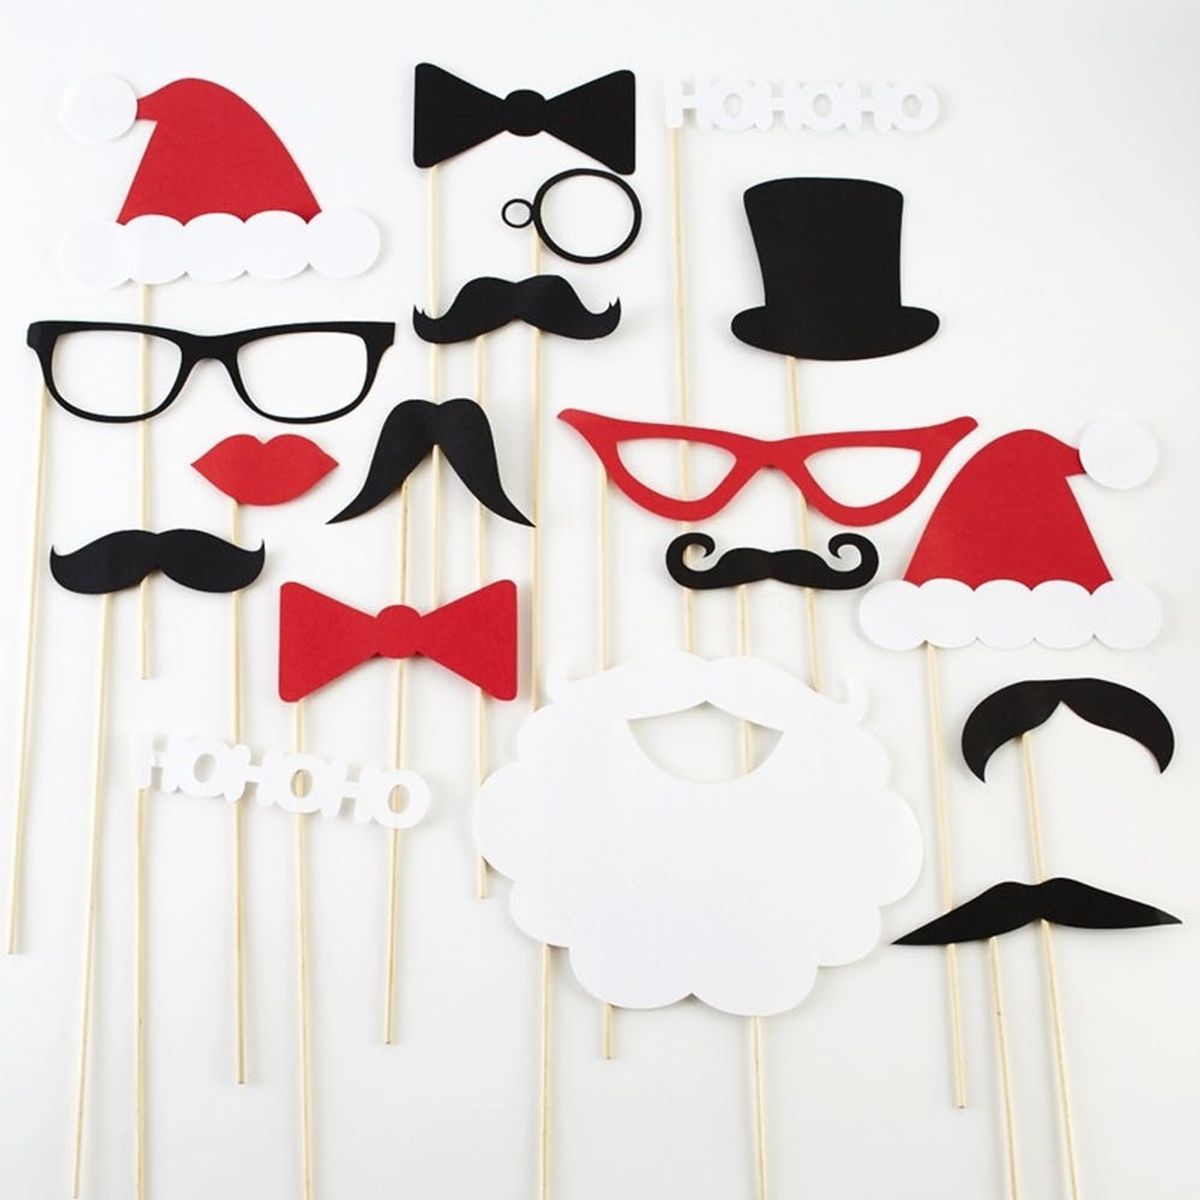 12 Things to Bring to a Holiday Party Besides a Bottle of Wine